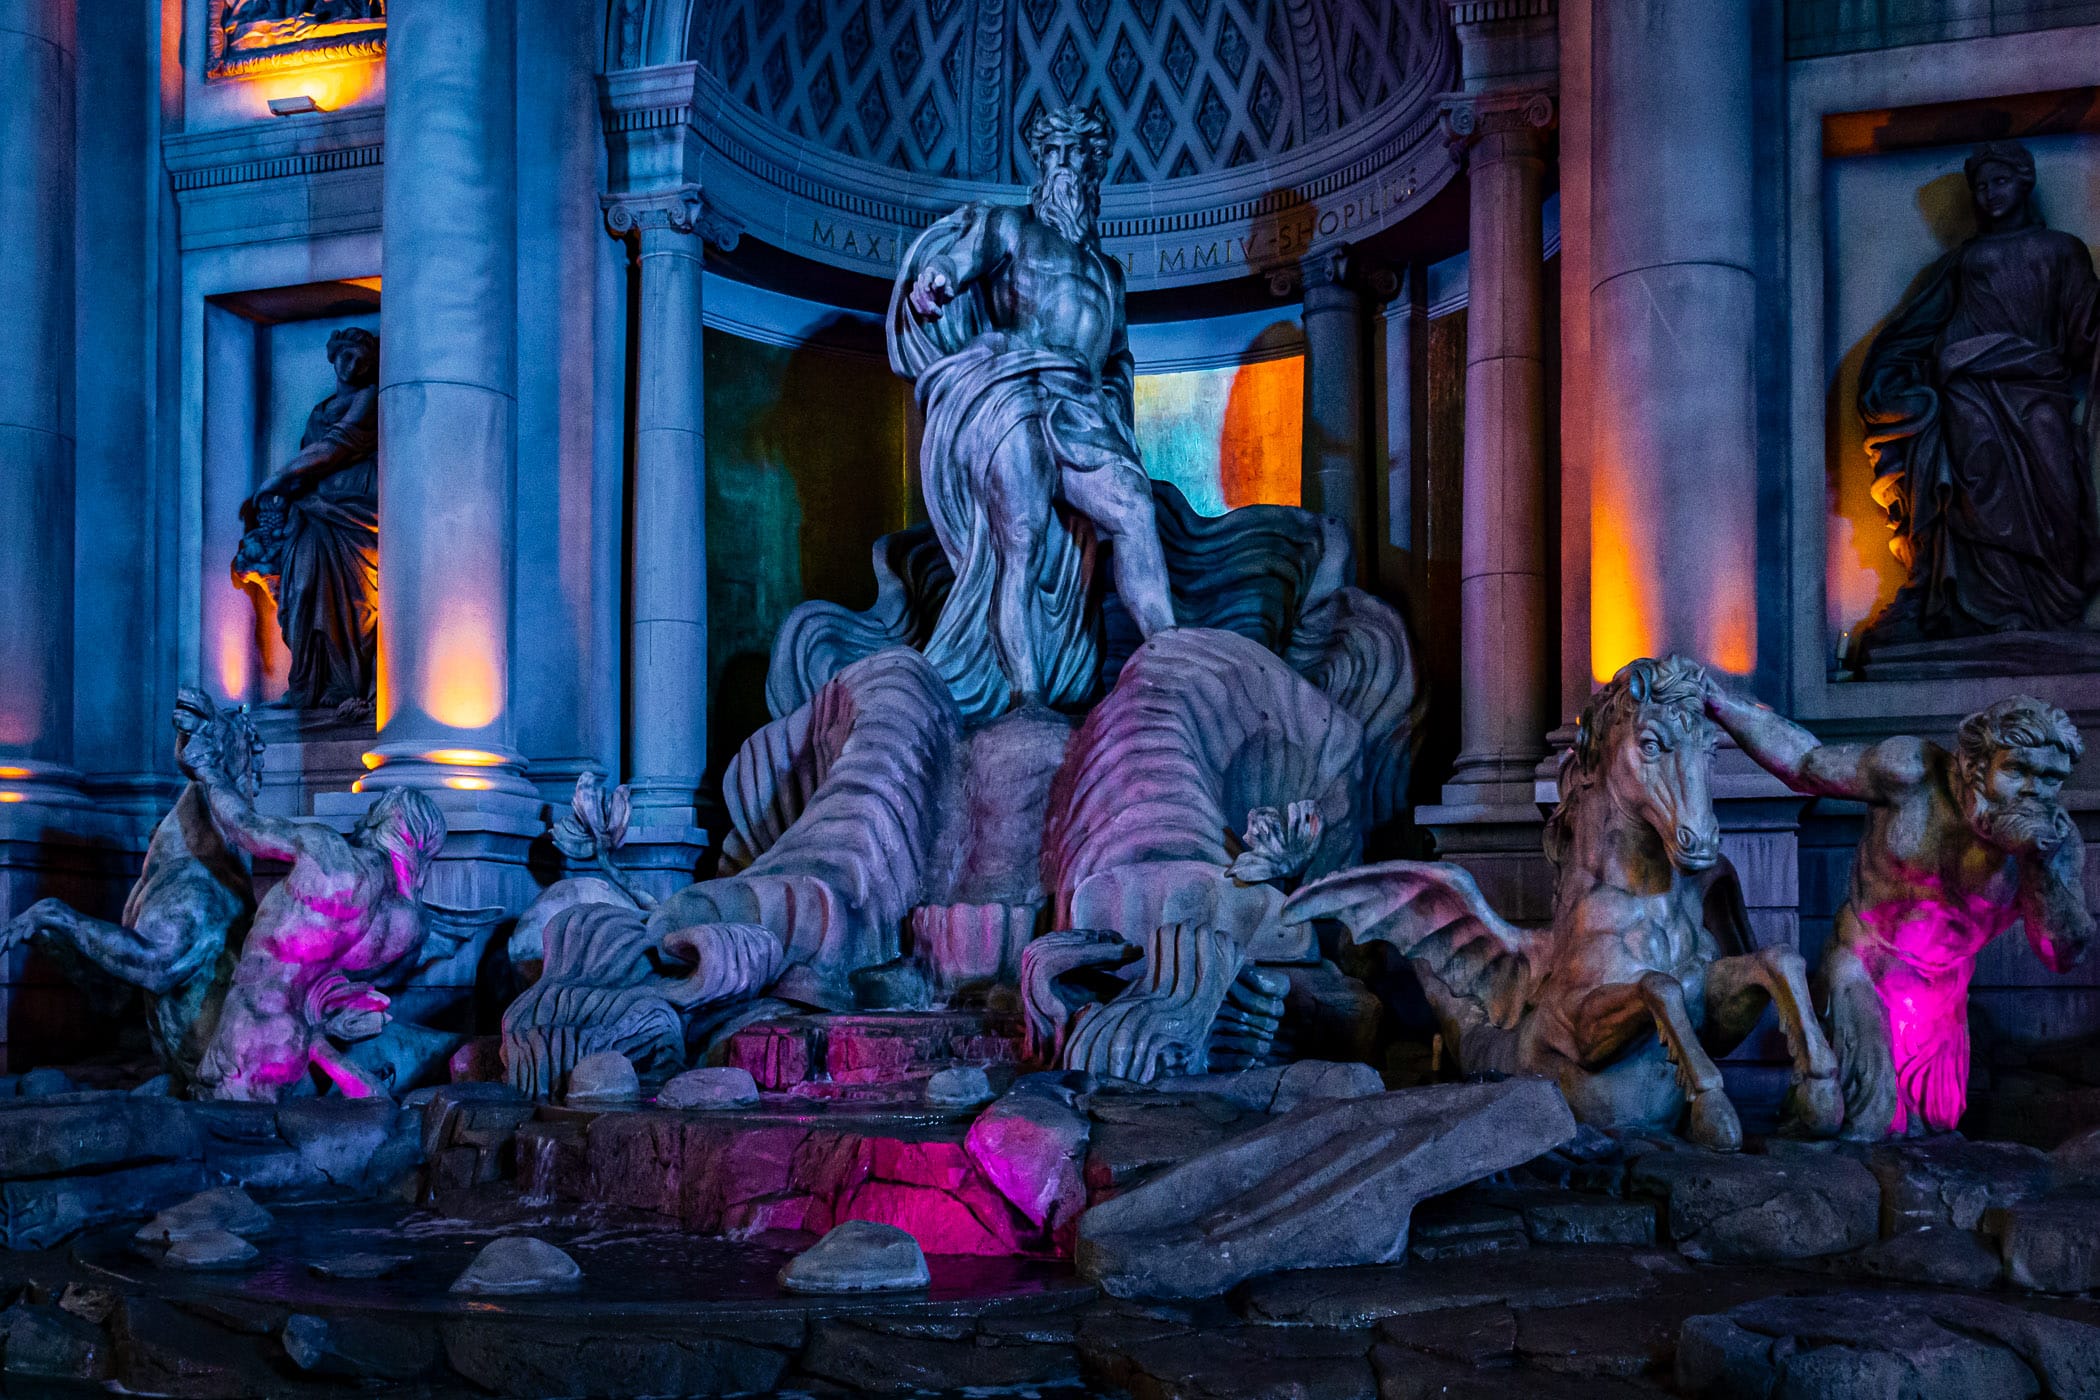 The reproduction of Roma's Trevi Fountain at the Forum Shops at Caesars, Las Vegas.